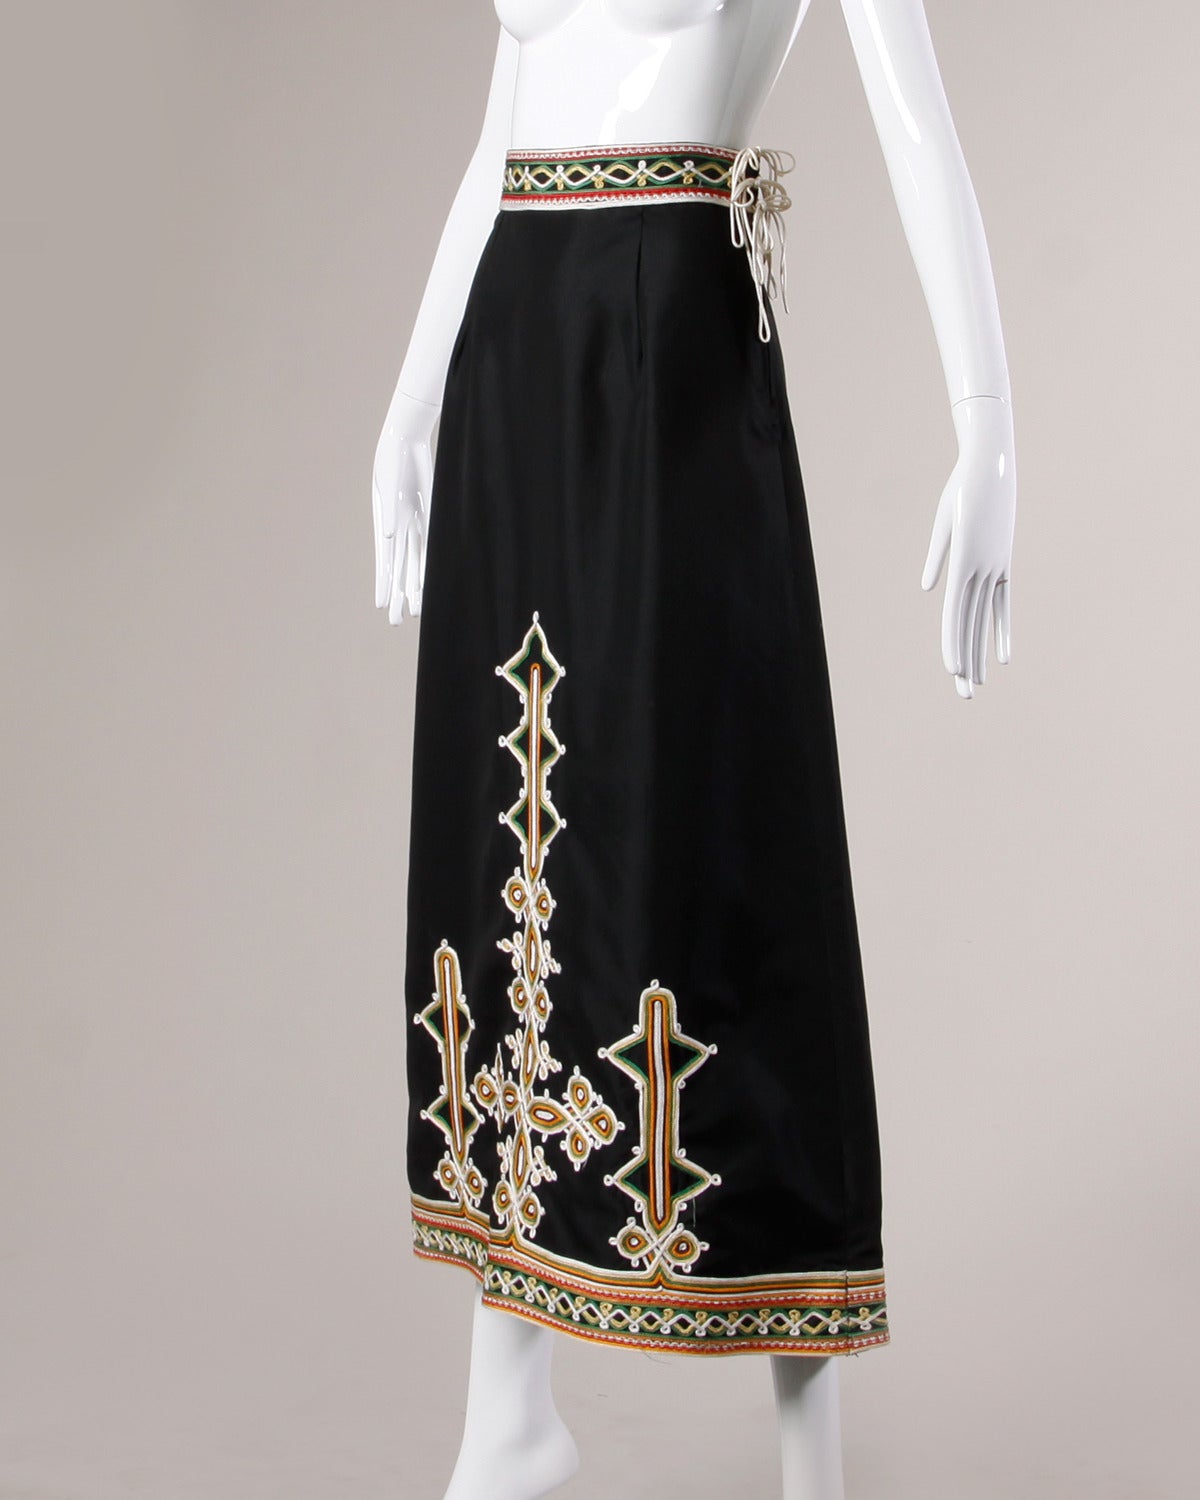 Black Neiman Marcus Trophy Room Vintage 1970s Embroidered Maxi Skirt